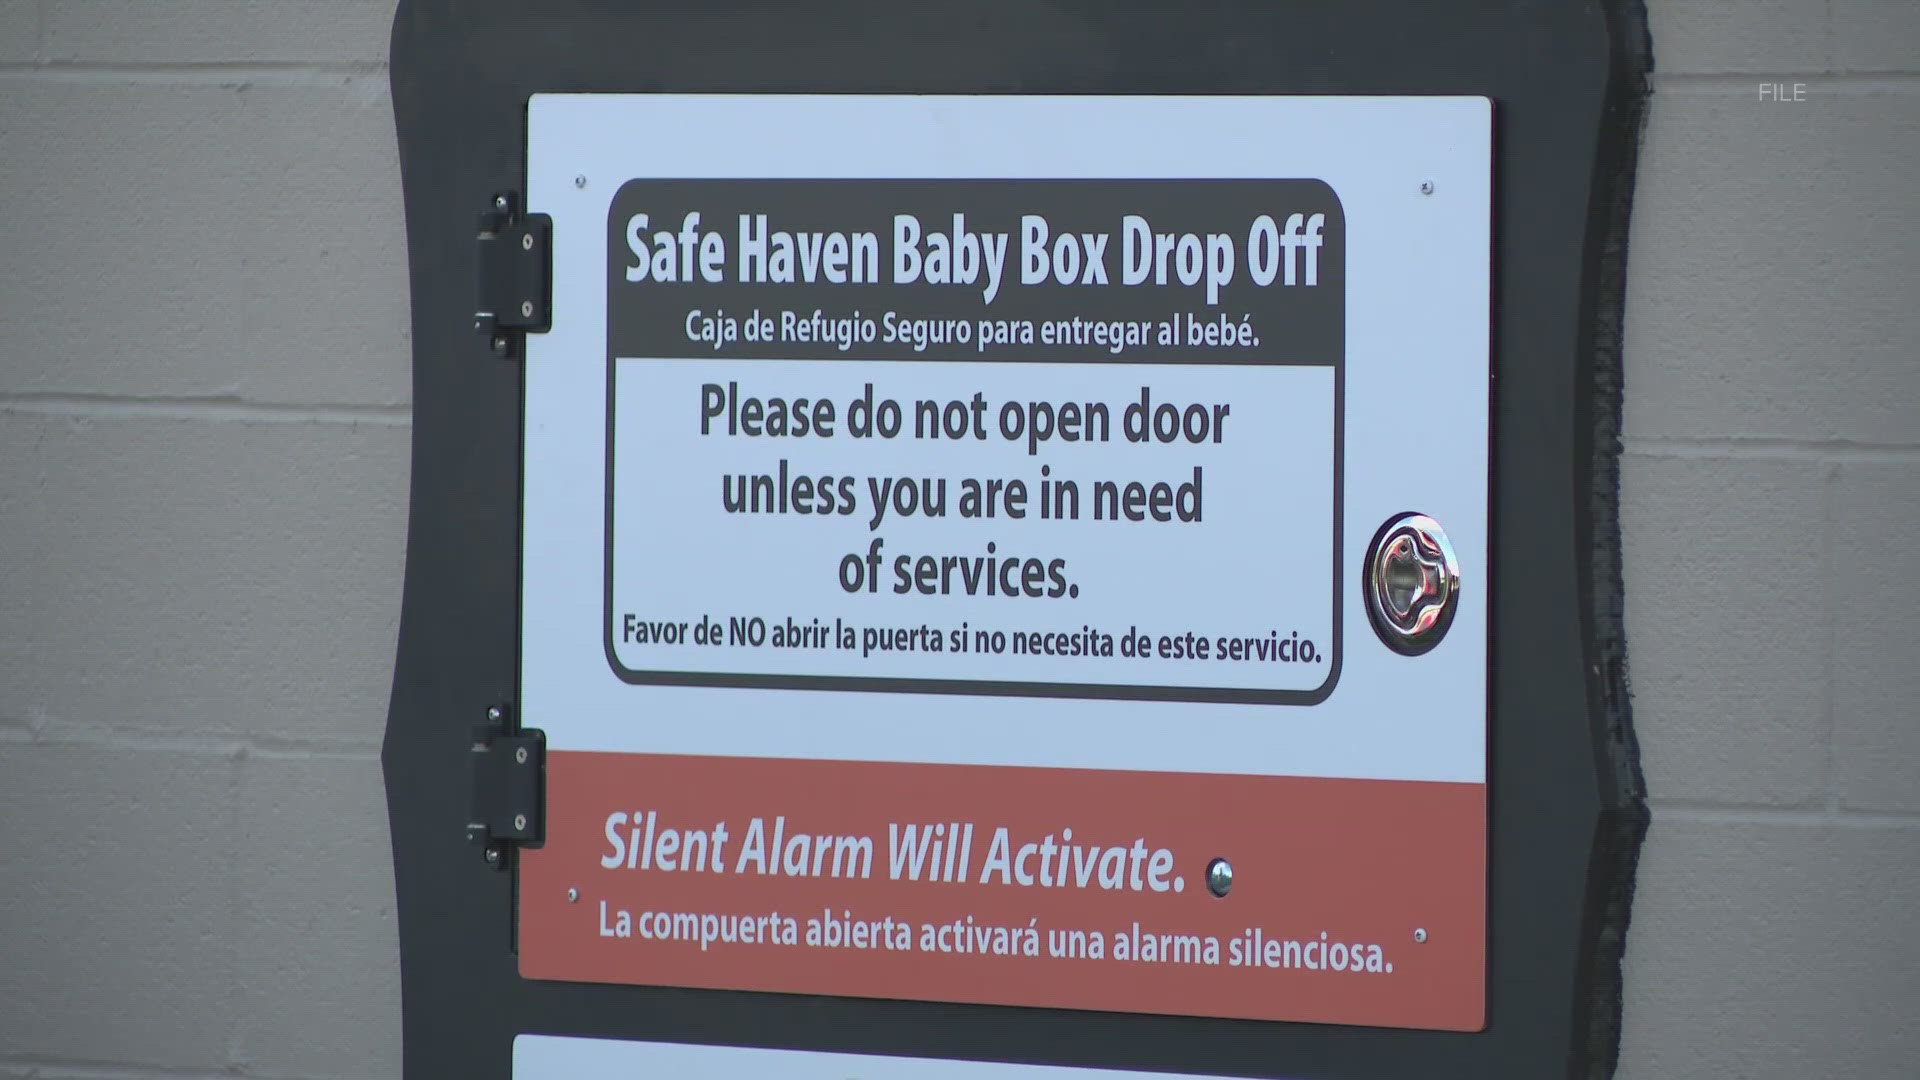 The infant was surrendered last week at the Georgetown Township Fire Protection District, according to officials. It was the first surrender of the year.